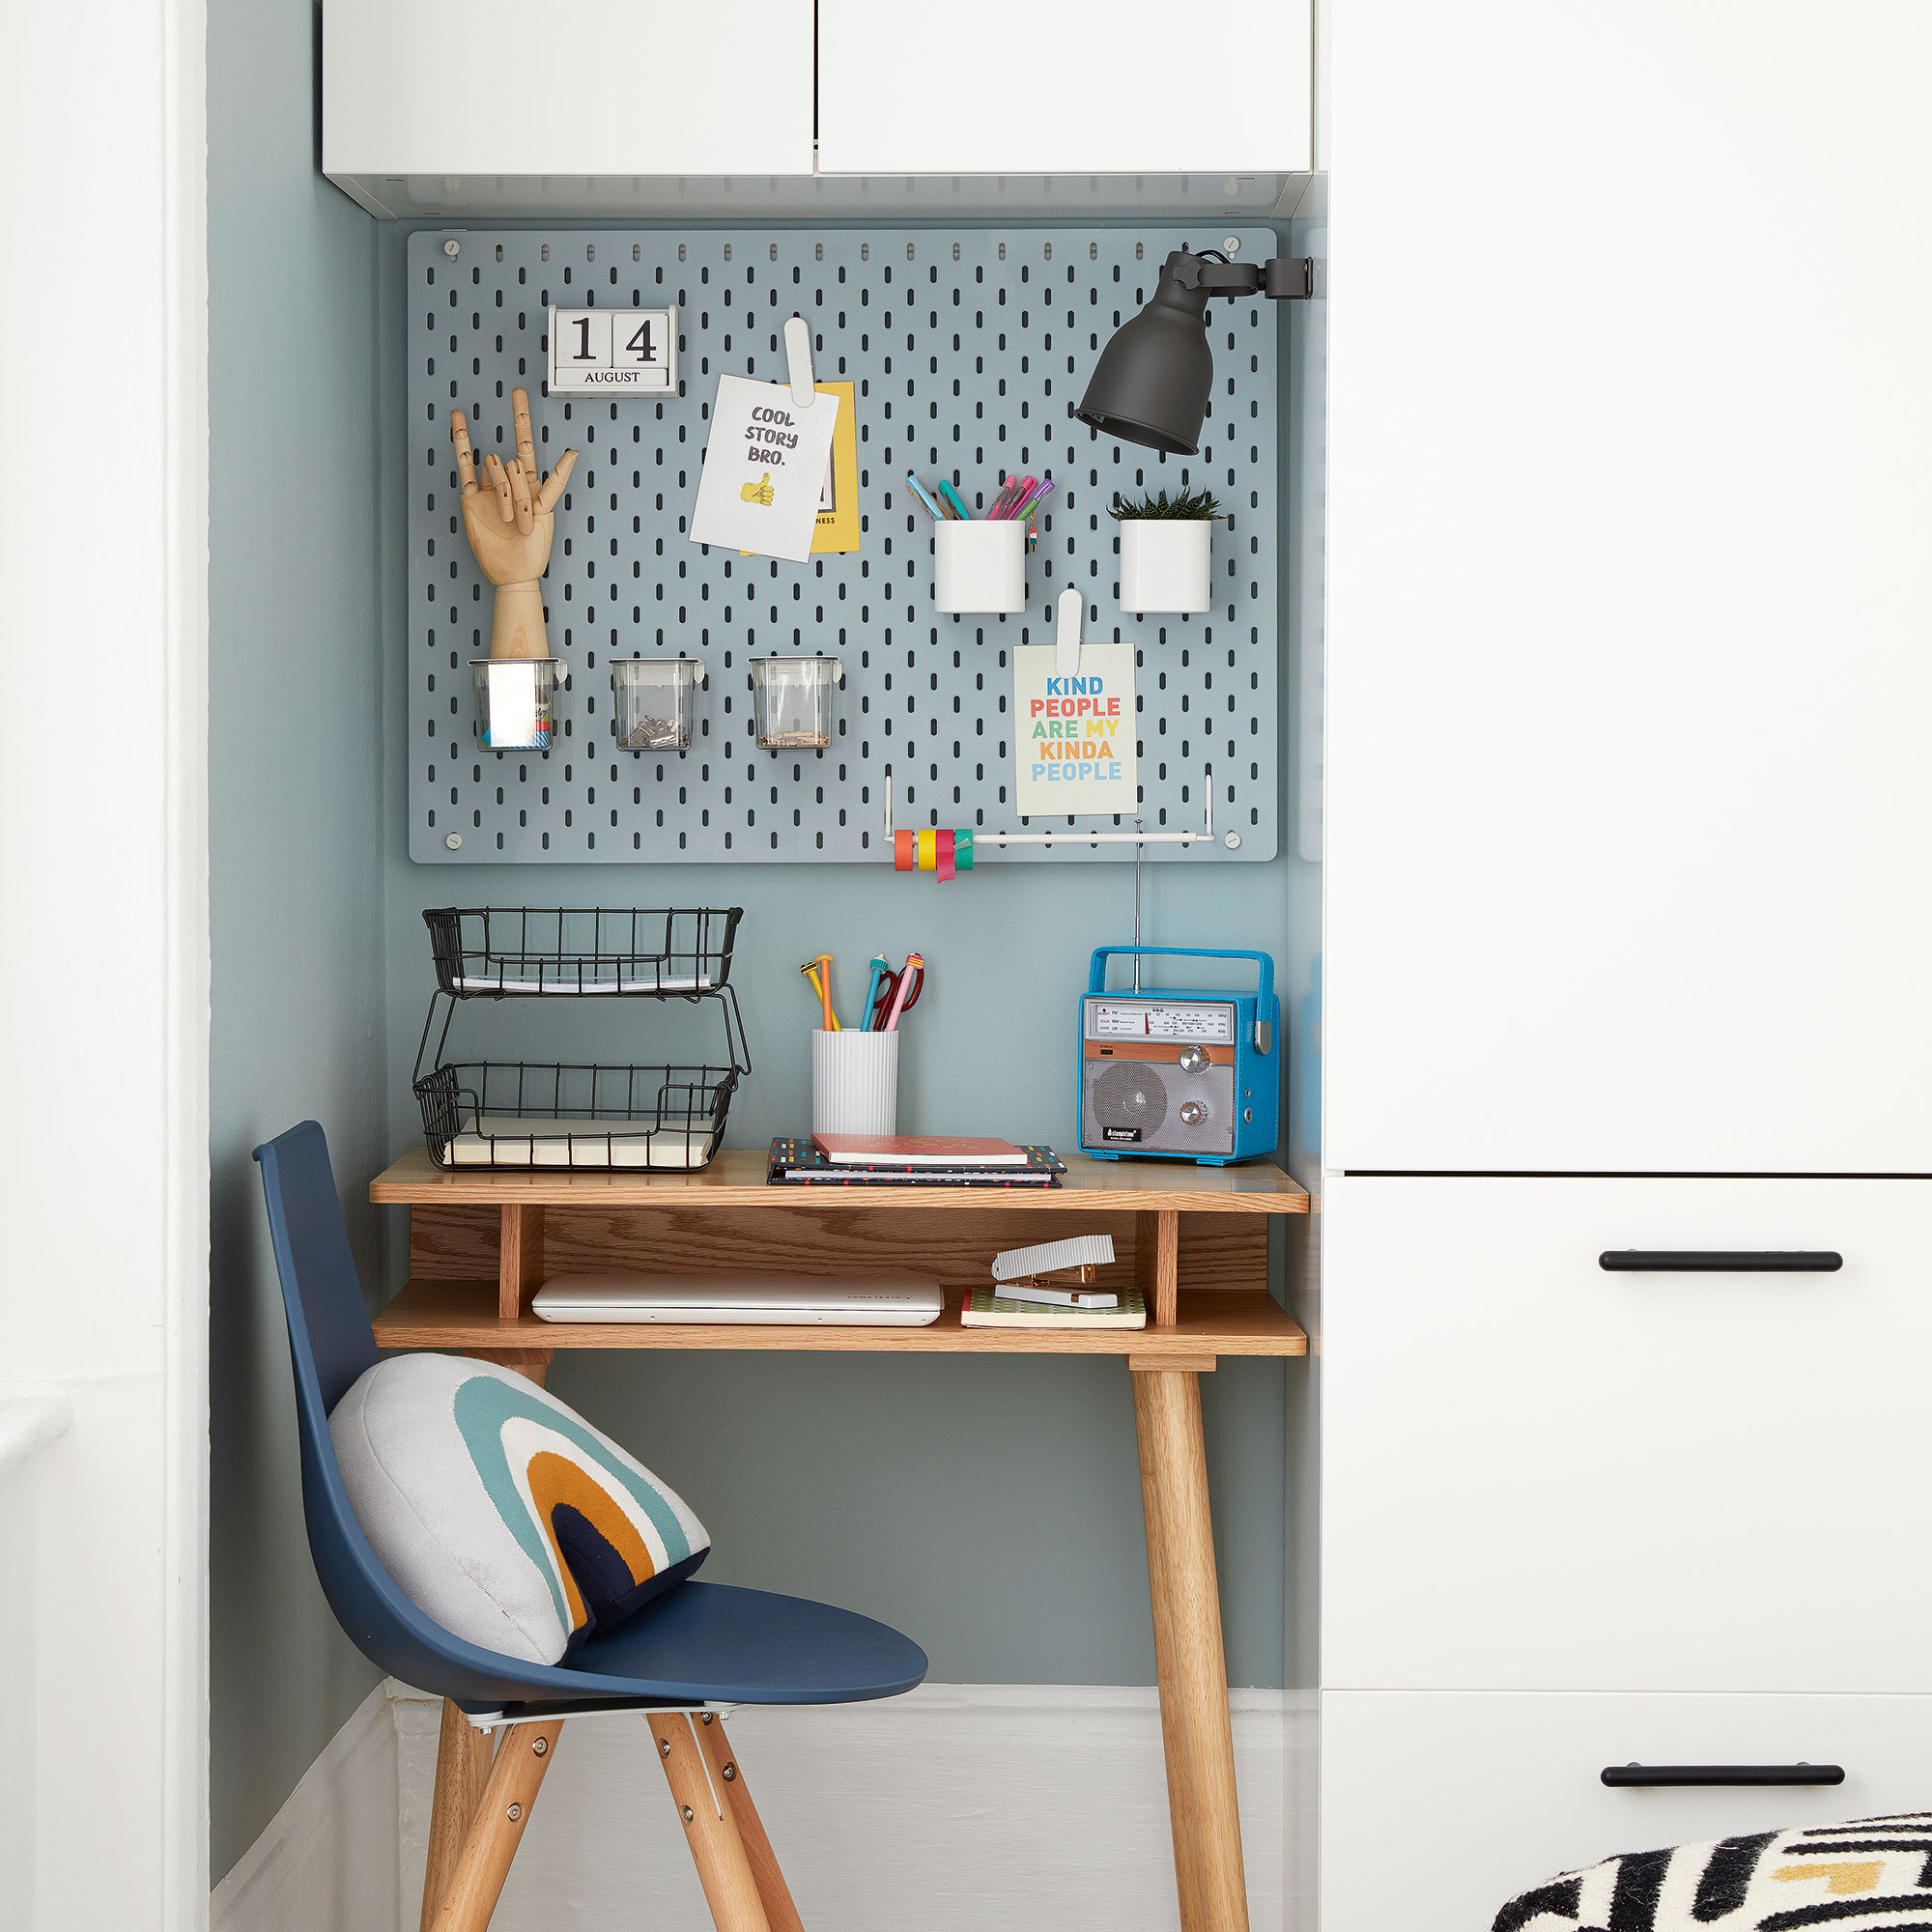 2. Use clever storage solutions